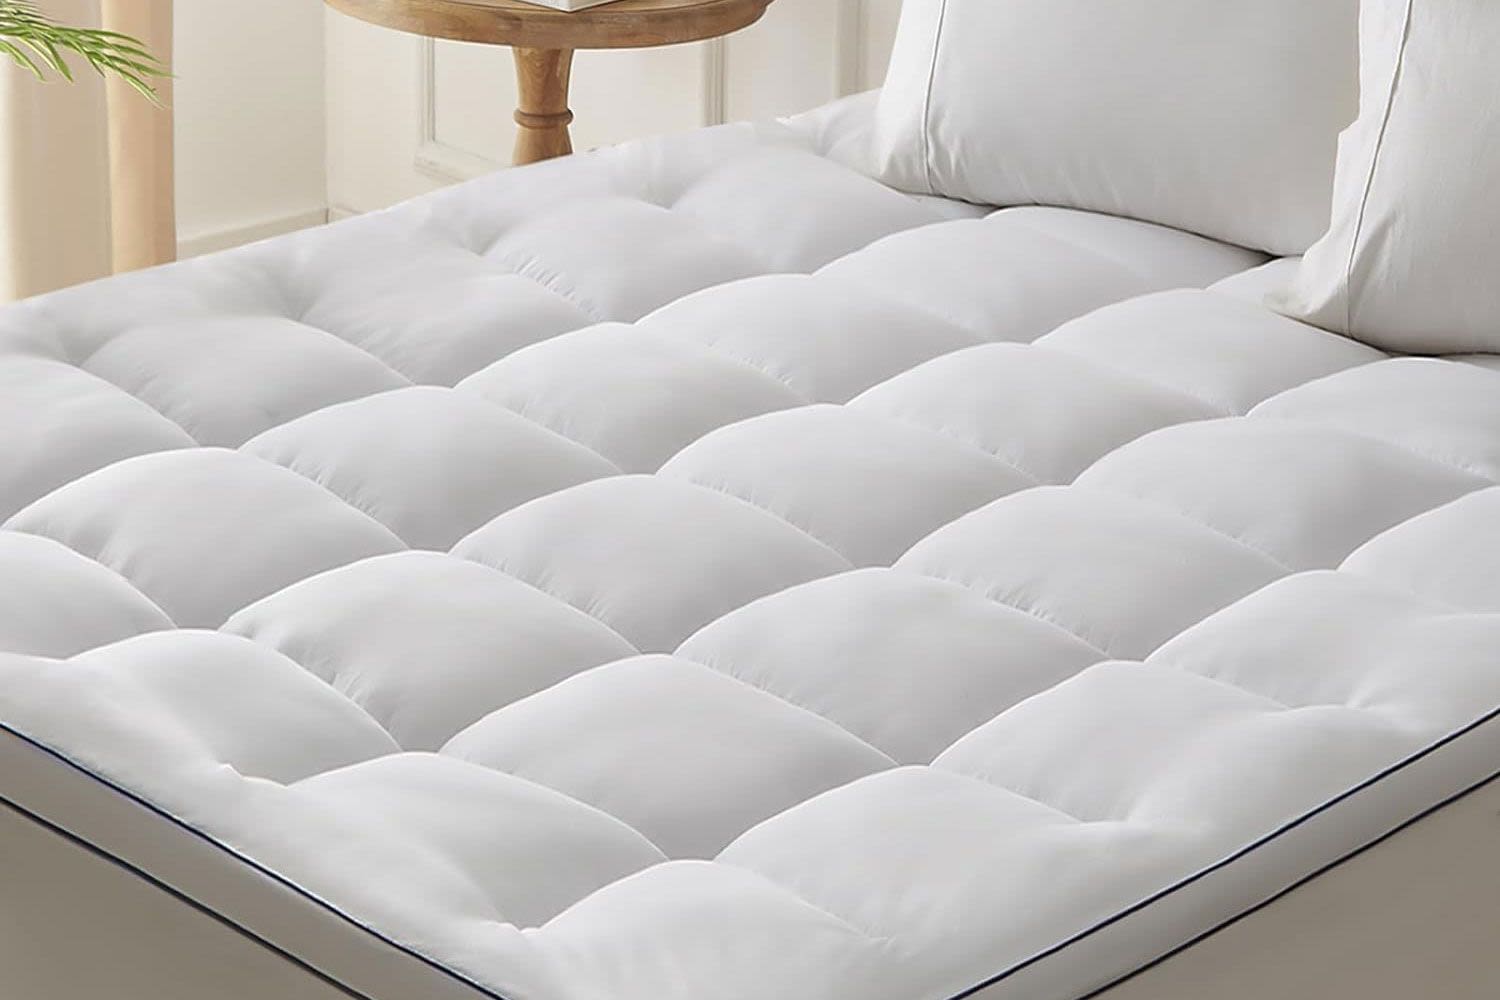 The Best Amazon Deals for Hot Sleepers: Cooling Mattresses, Sheets, and More — Up to 77% Off